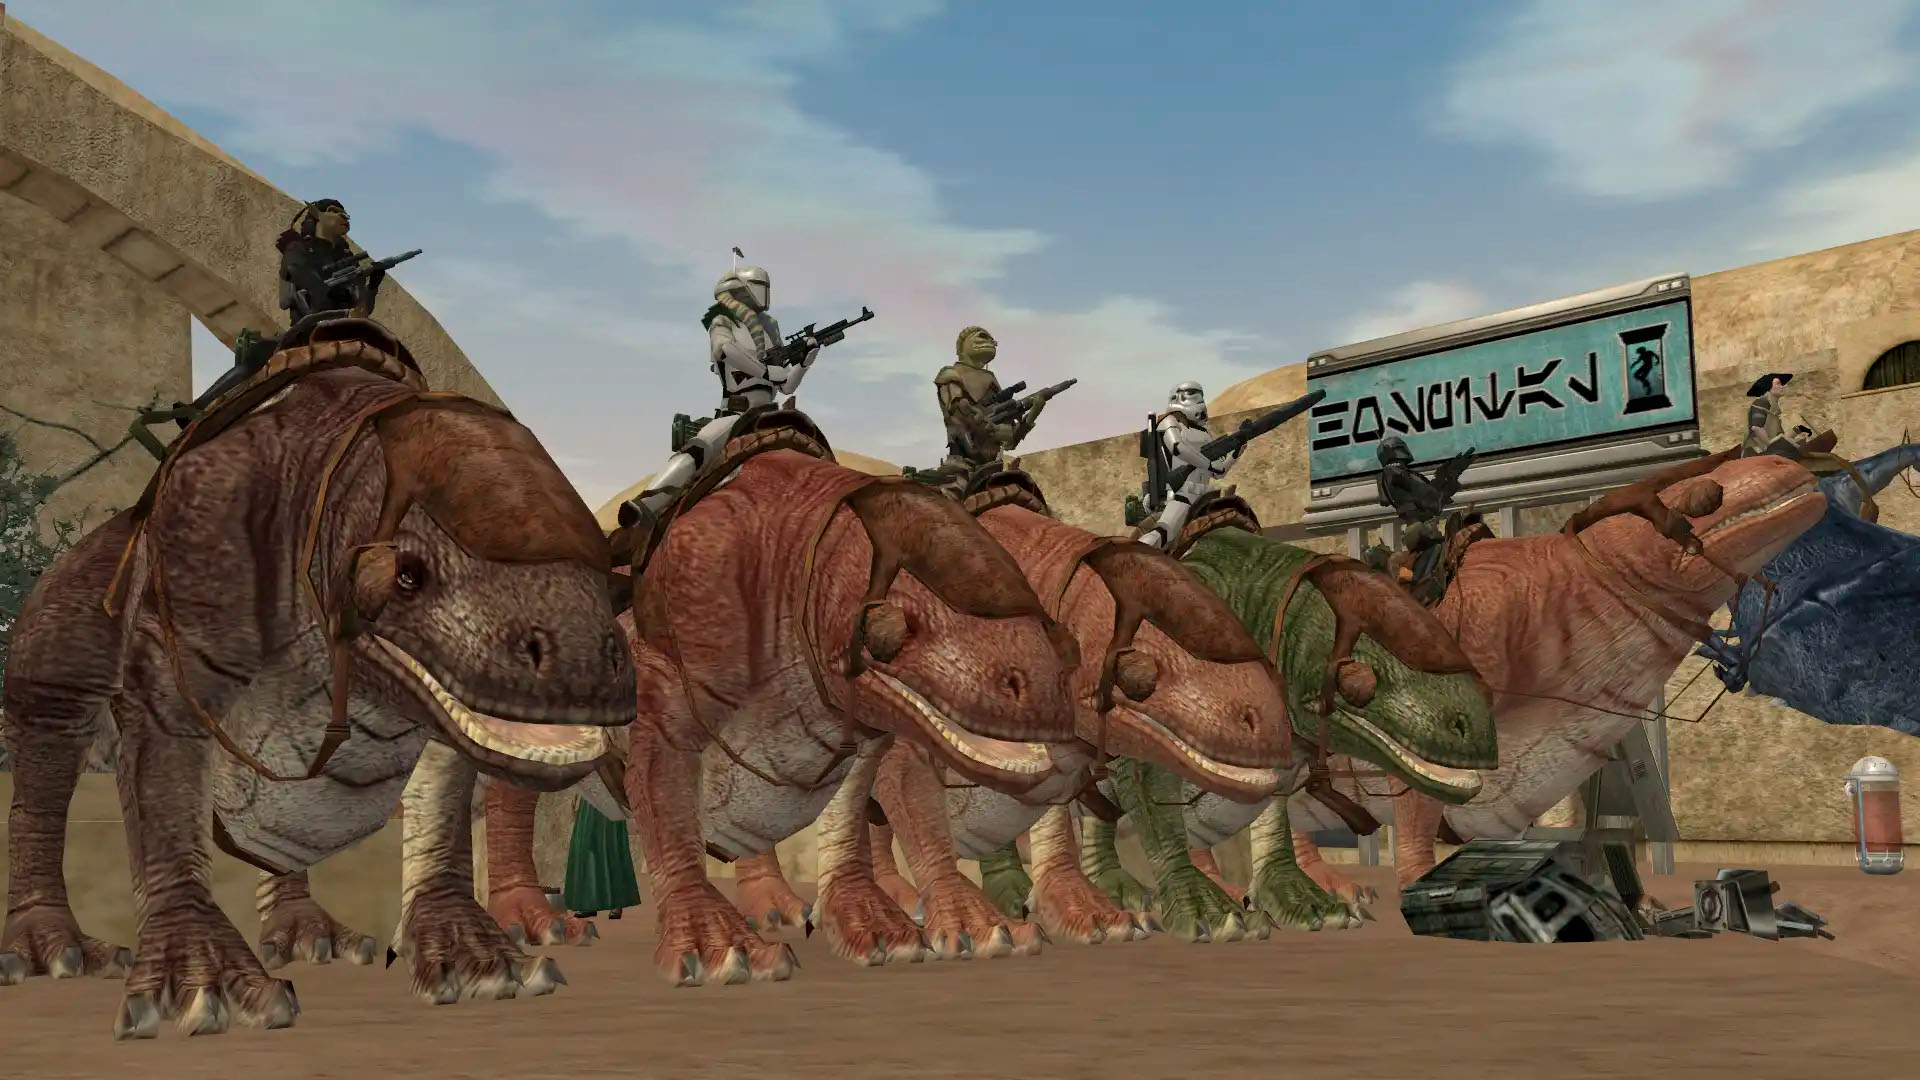 The Complete List of Star Wars Galaxies Rogue Servers